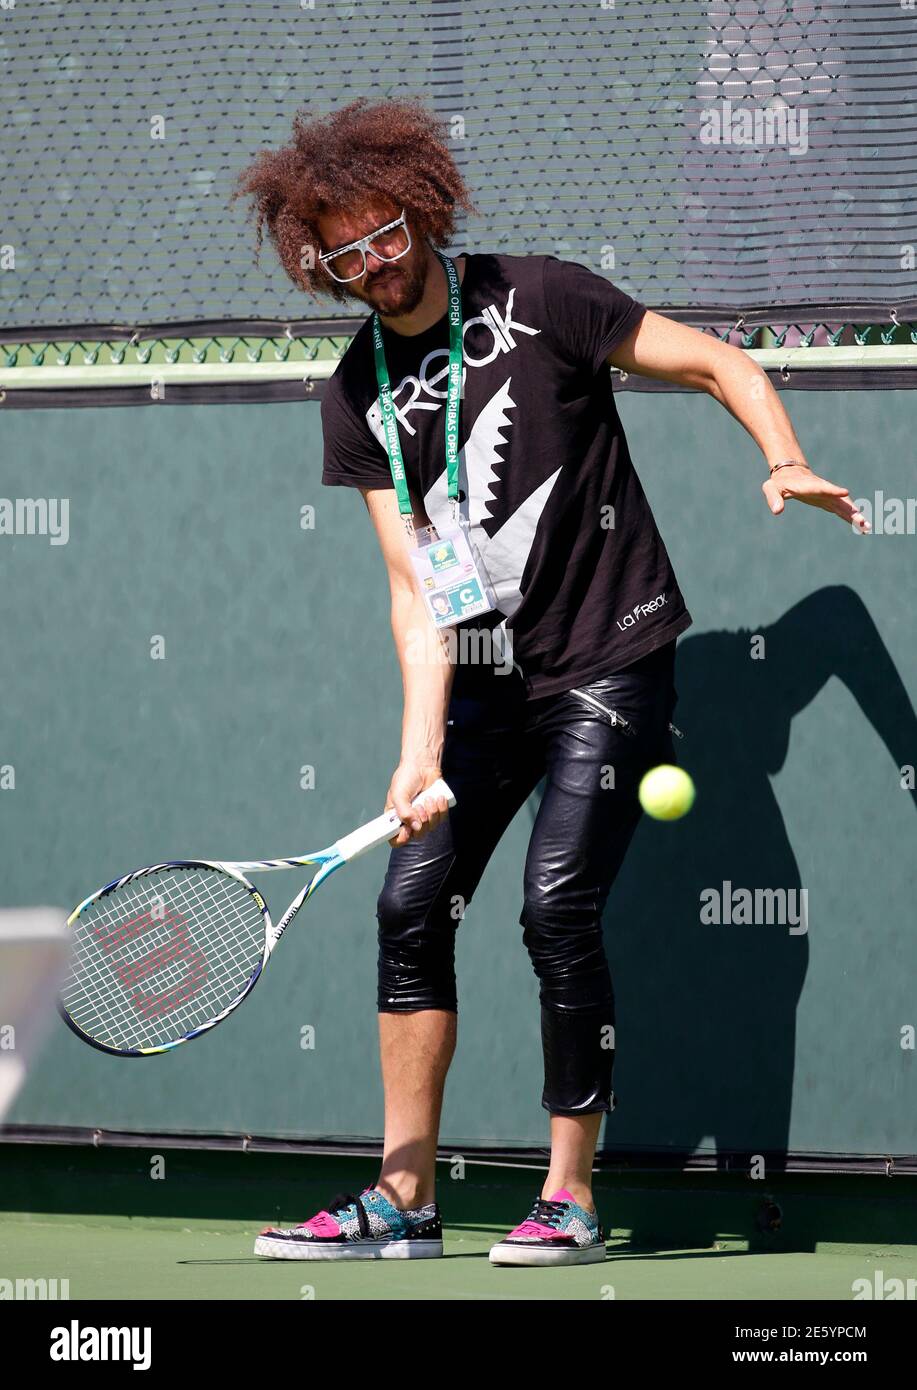 Redfoo, also known as Stefan Gordy of the band LMFAO, hits a tennis ball as  his girlfriend Victoria Azarenka of Belarus attends a practice session to  prepare for the BNP Paribas Open